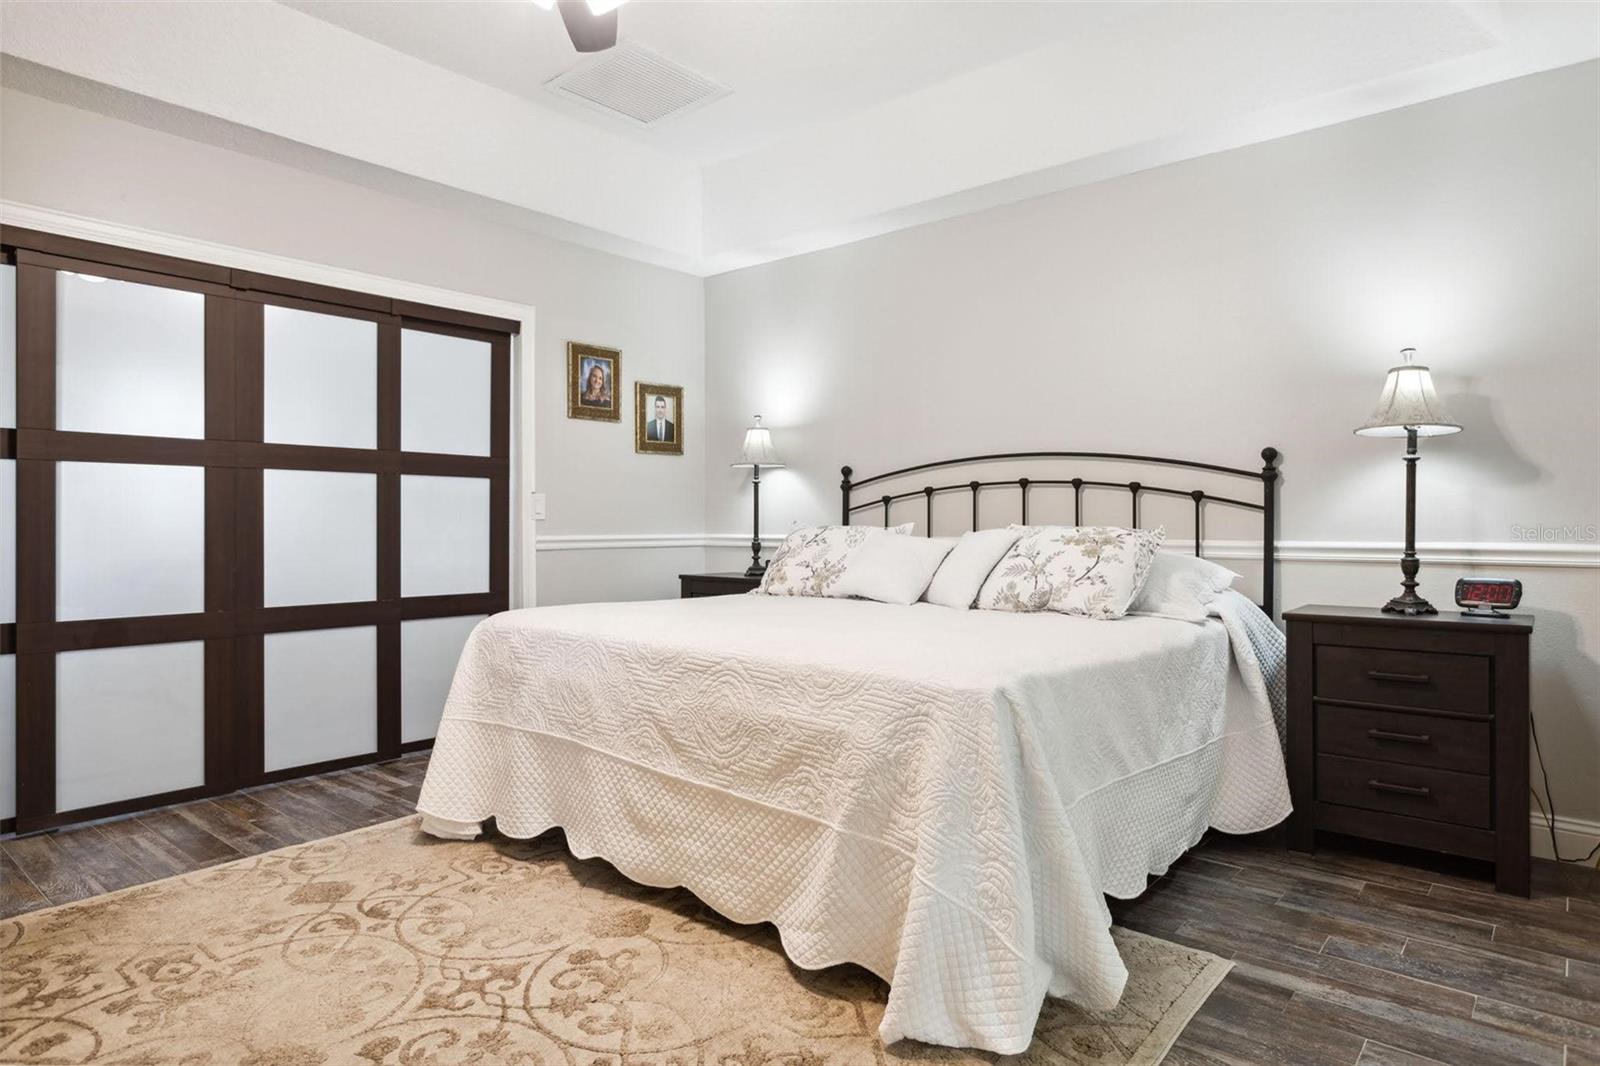 Beautiful master bedroom with cali-sliders into the expansive his and hers master closet.